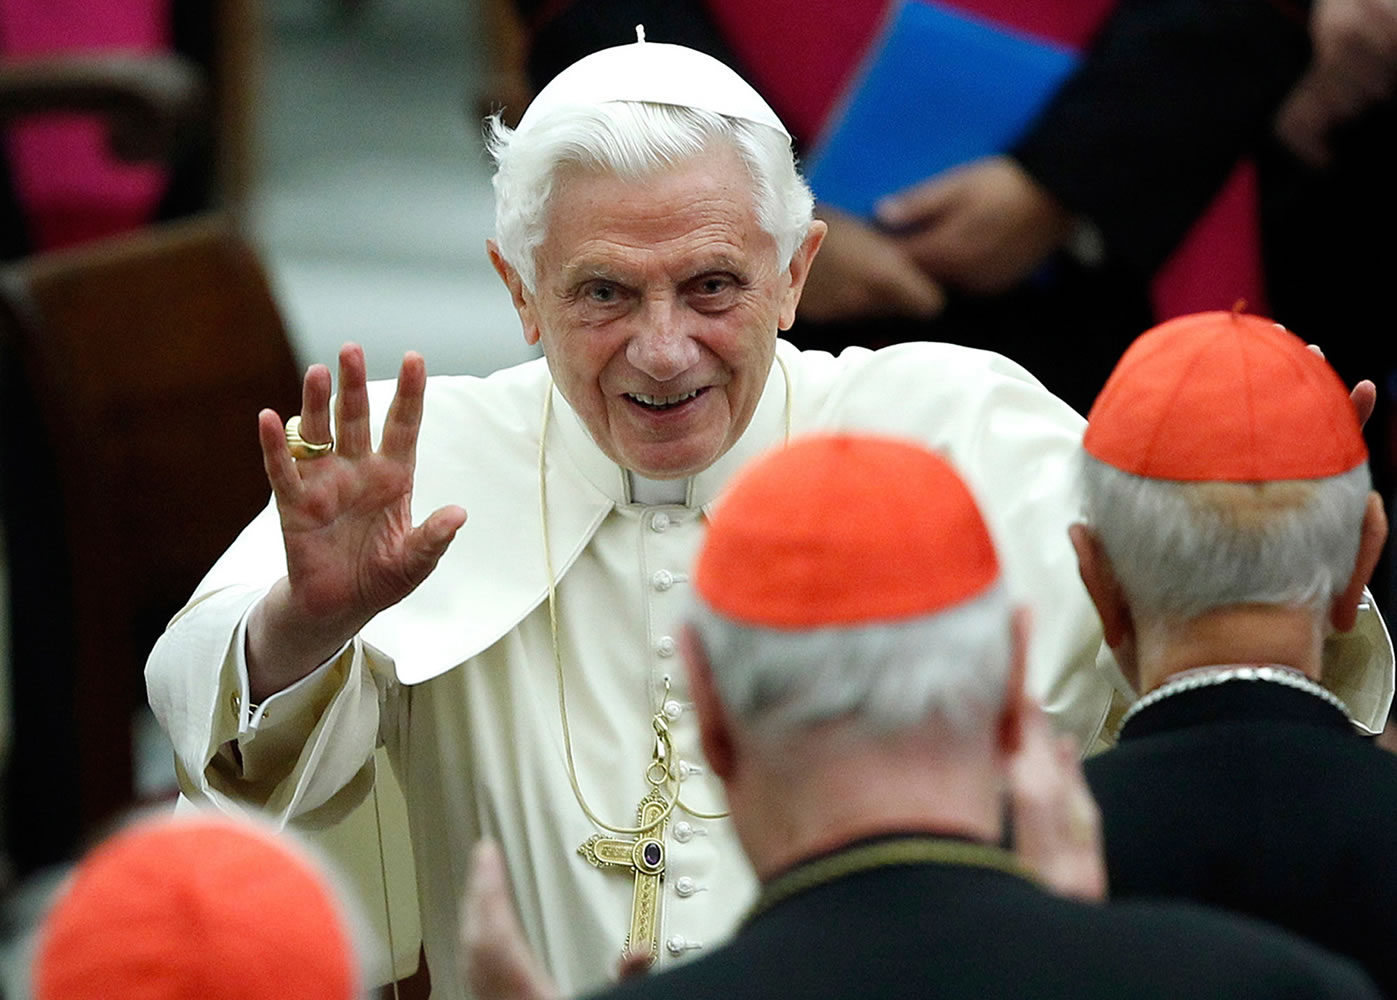 This Nov. 26, 2011 file photo shows Pope Benedict XVI waving as he leaves Paul VI hall after attending a concert of the Asturias Principality Symphony Orchestra directed by Chilean conductor Maximiano Valdes, at the Vatican. On Monday, Feb. 11, 2013 the Vatican announced that Pope Benedict XVI will resign on Feb.